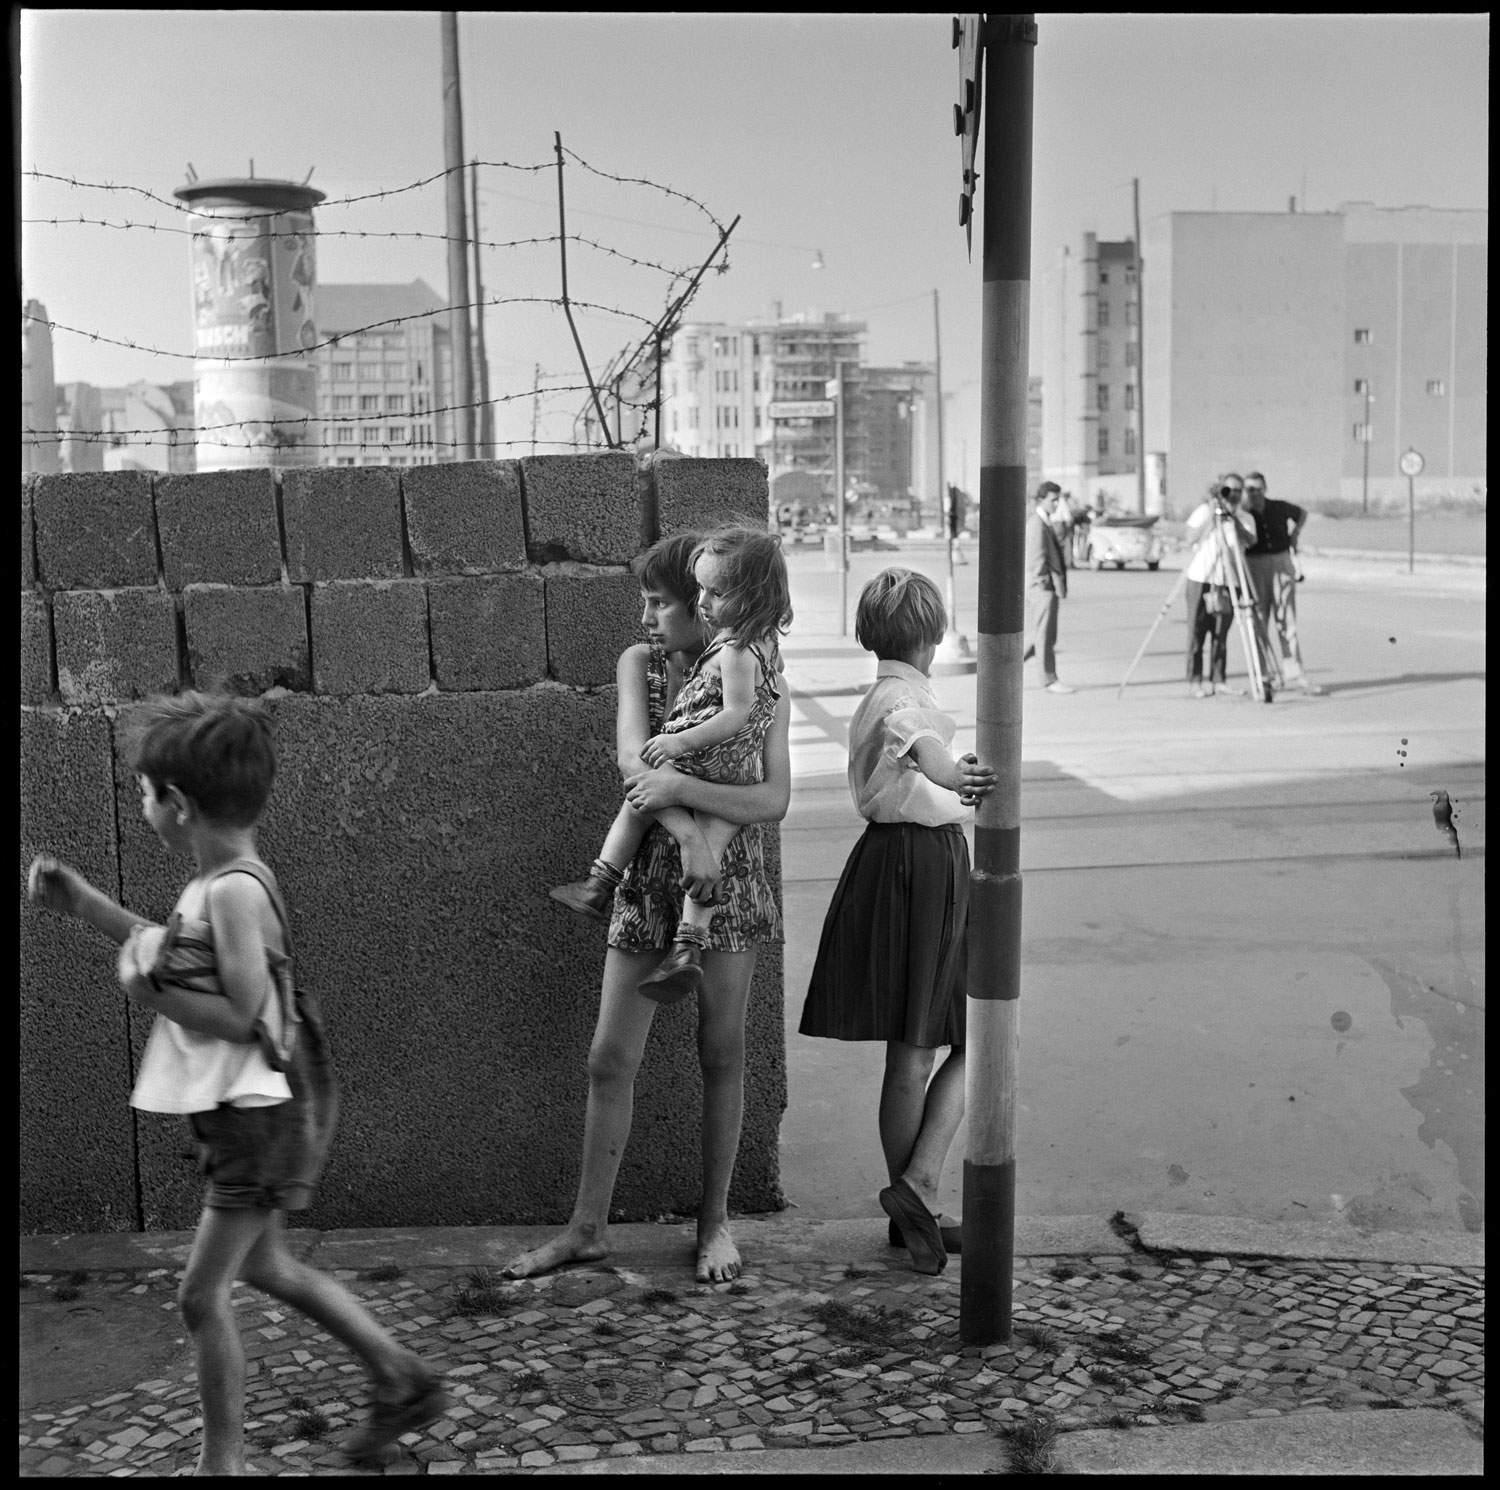 Children playing near a portion of the Berlin Wall at the time of its construction, Friedrichstrasse near Checkpoint Charlie, West Berlin, Germany, August 1961